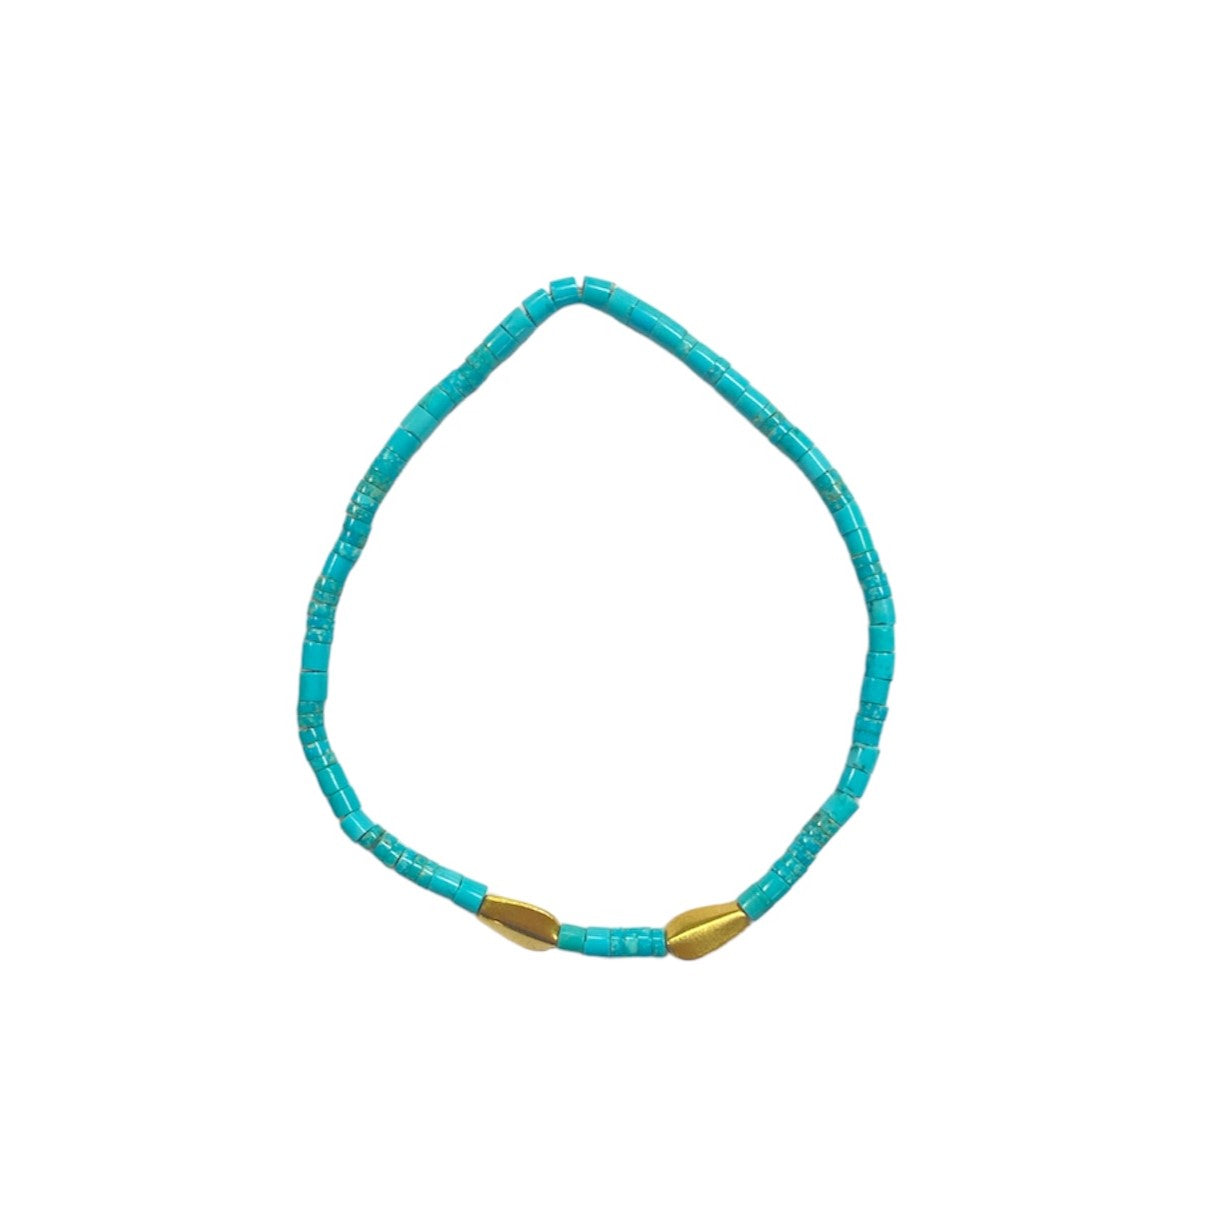 Turquoise & Duo Gold Tubes Stretch Bracelet